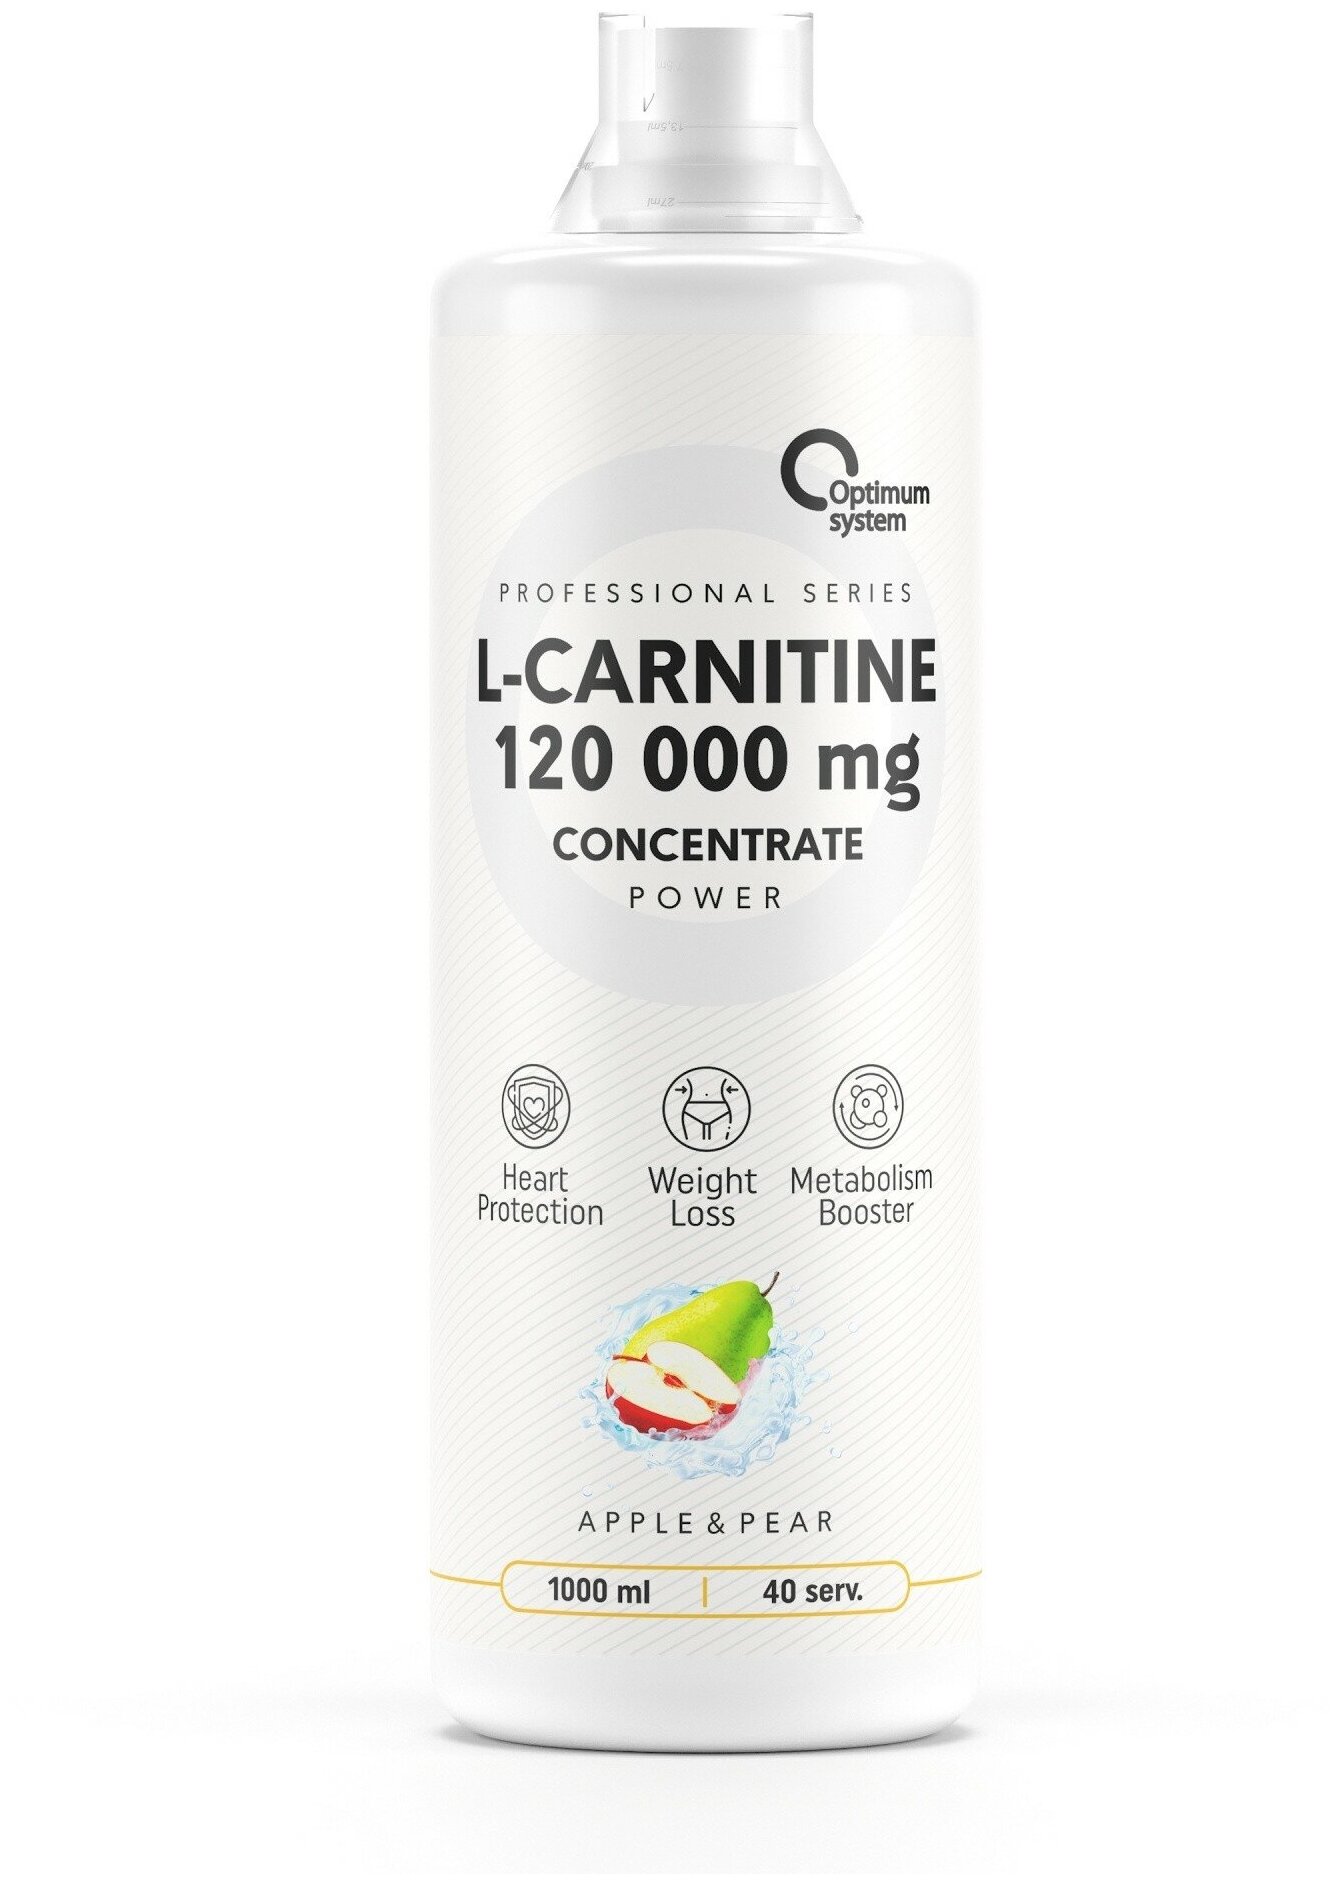 Optimum System L-Carnitine Concentrate 120000 mg POWER, 1000 мл (Вишня)